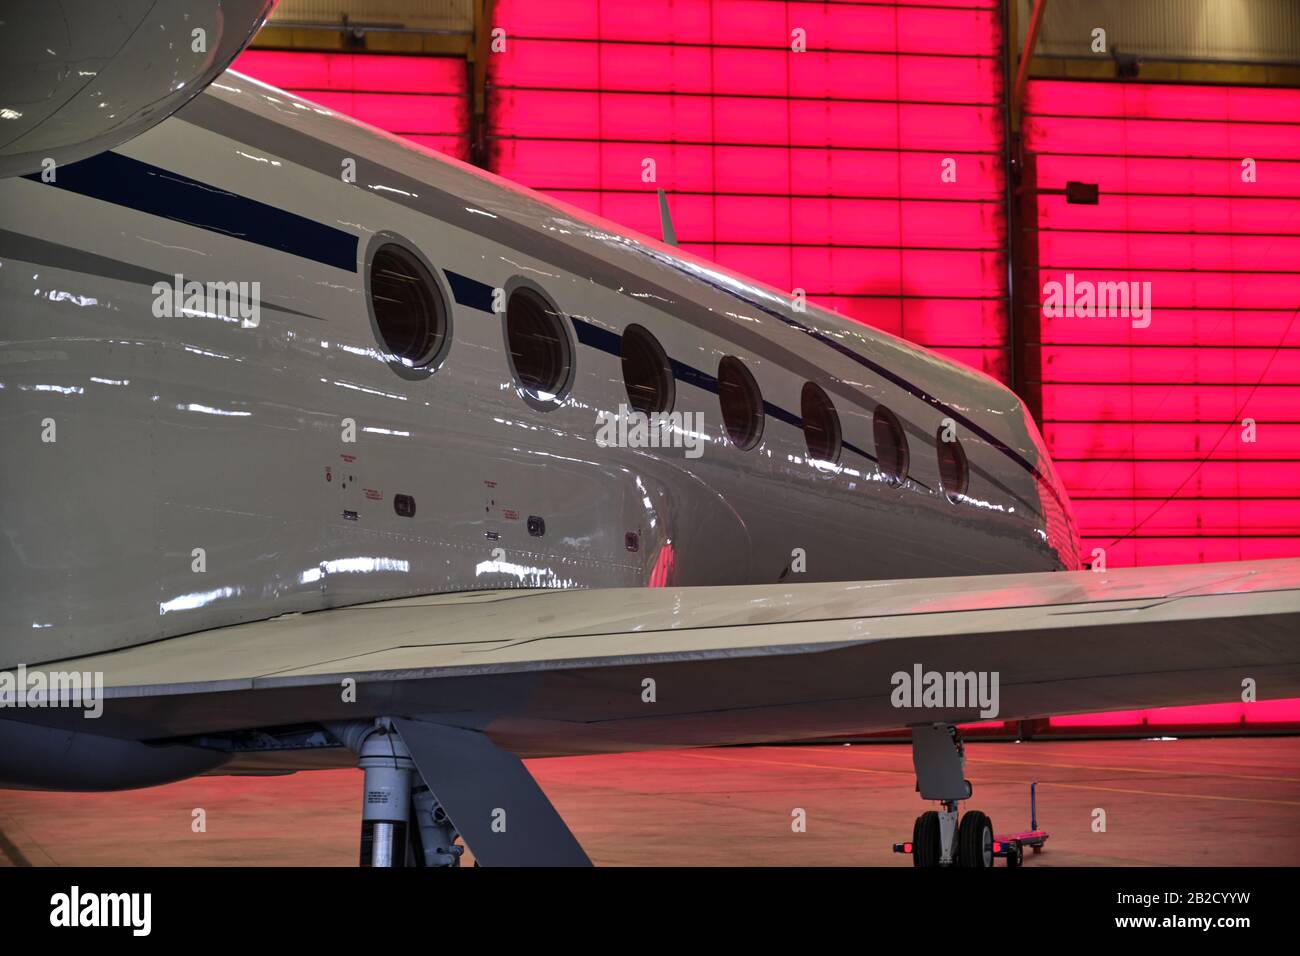 Pictured is a private aircraft in a hangar. Stock Photo